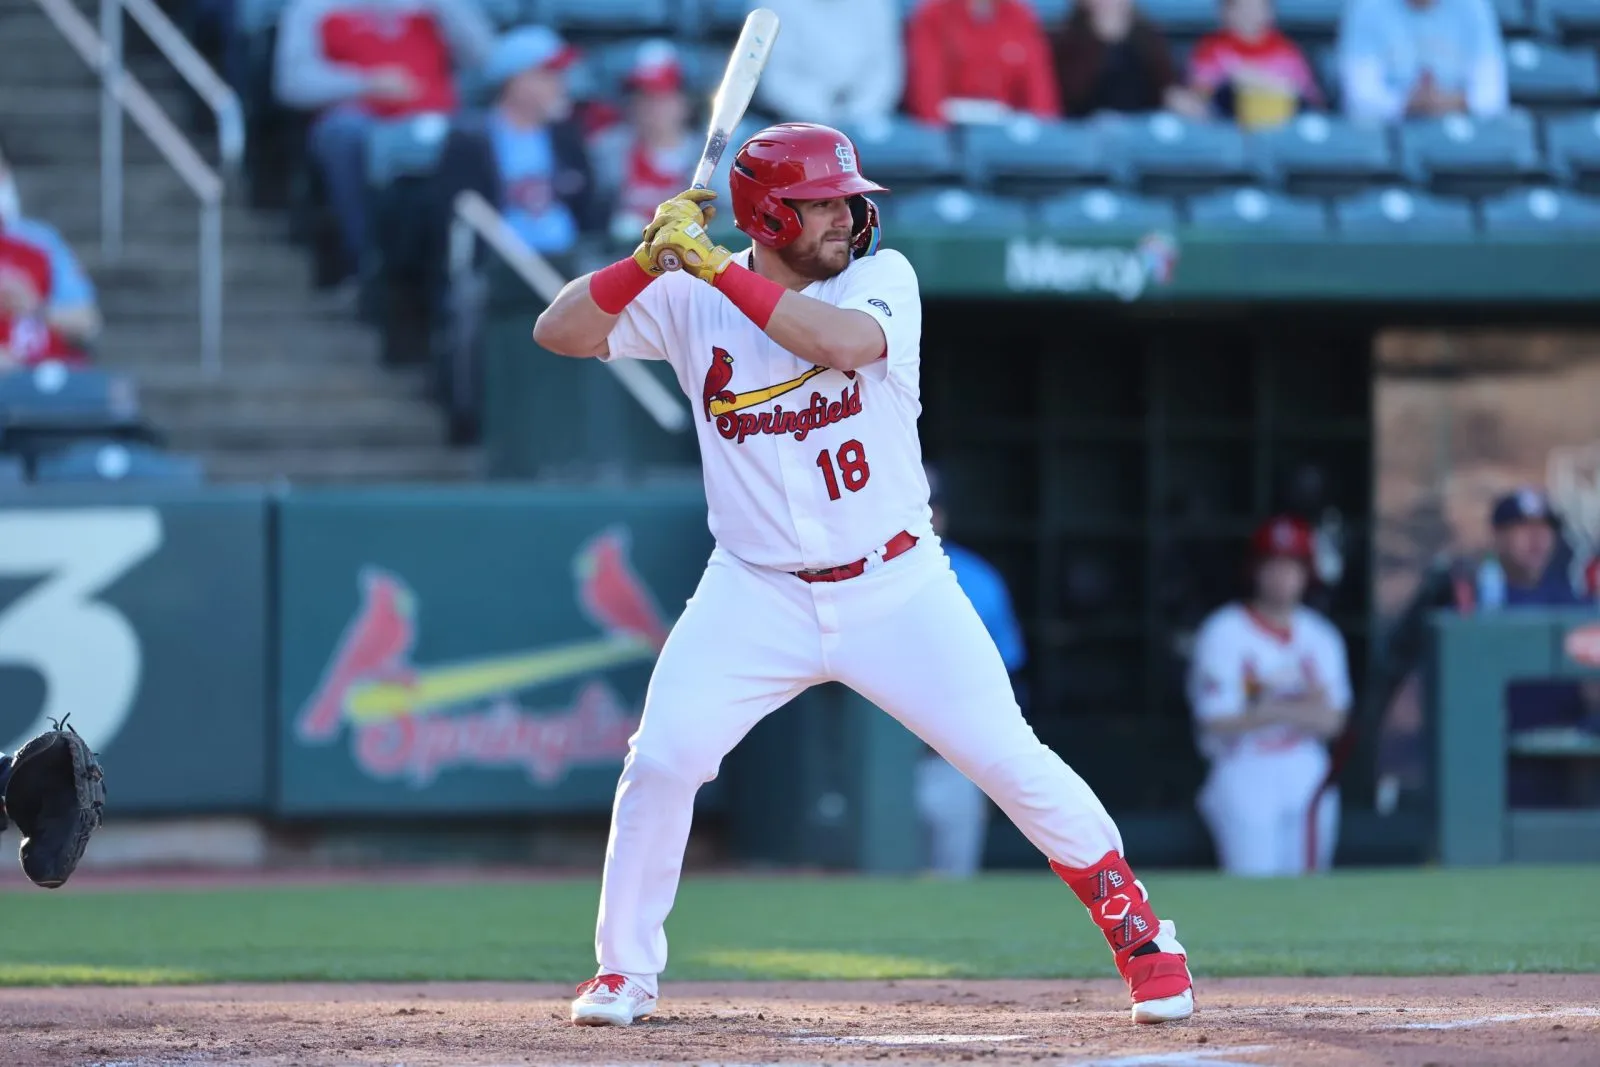 Pedro Pages, wearing a Springfield Cardinals uniform, gets ready to hit the baseball during a game